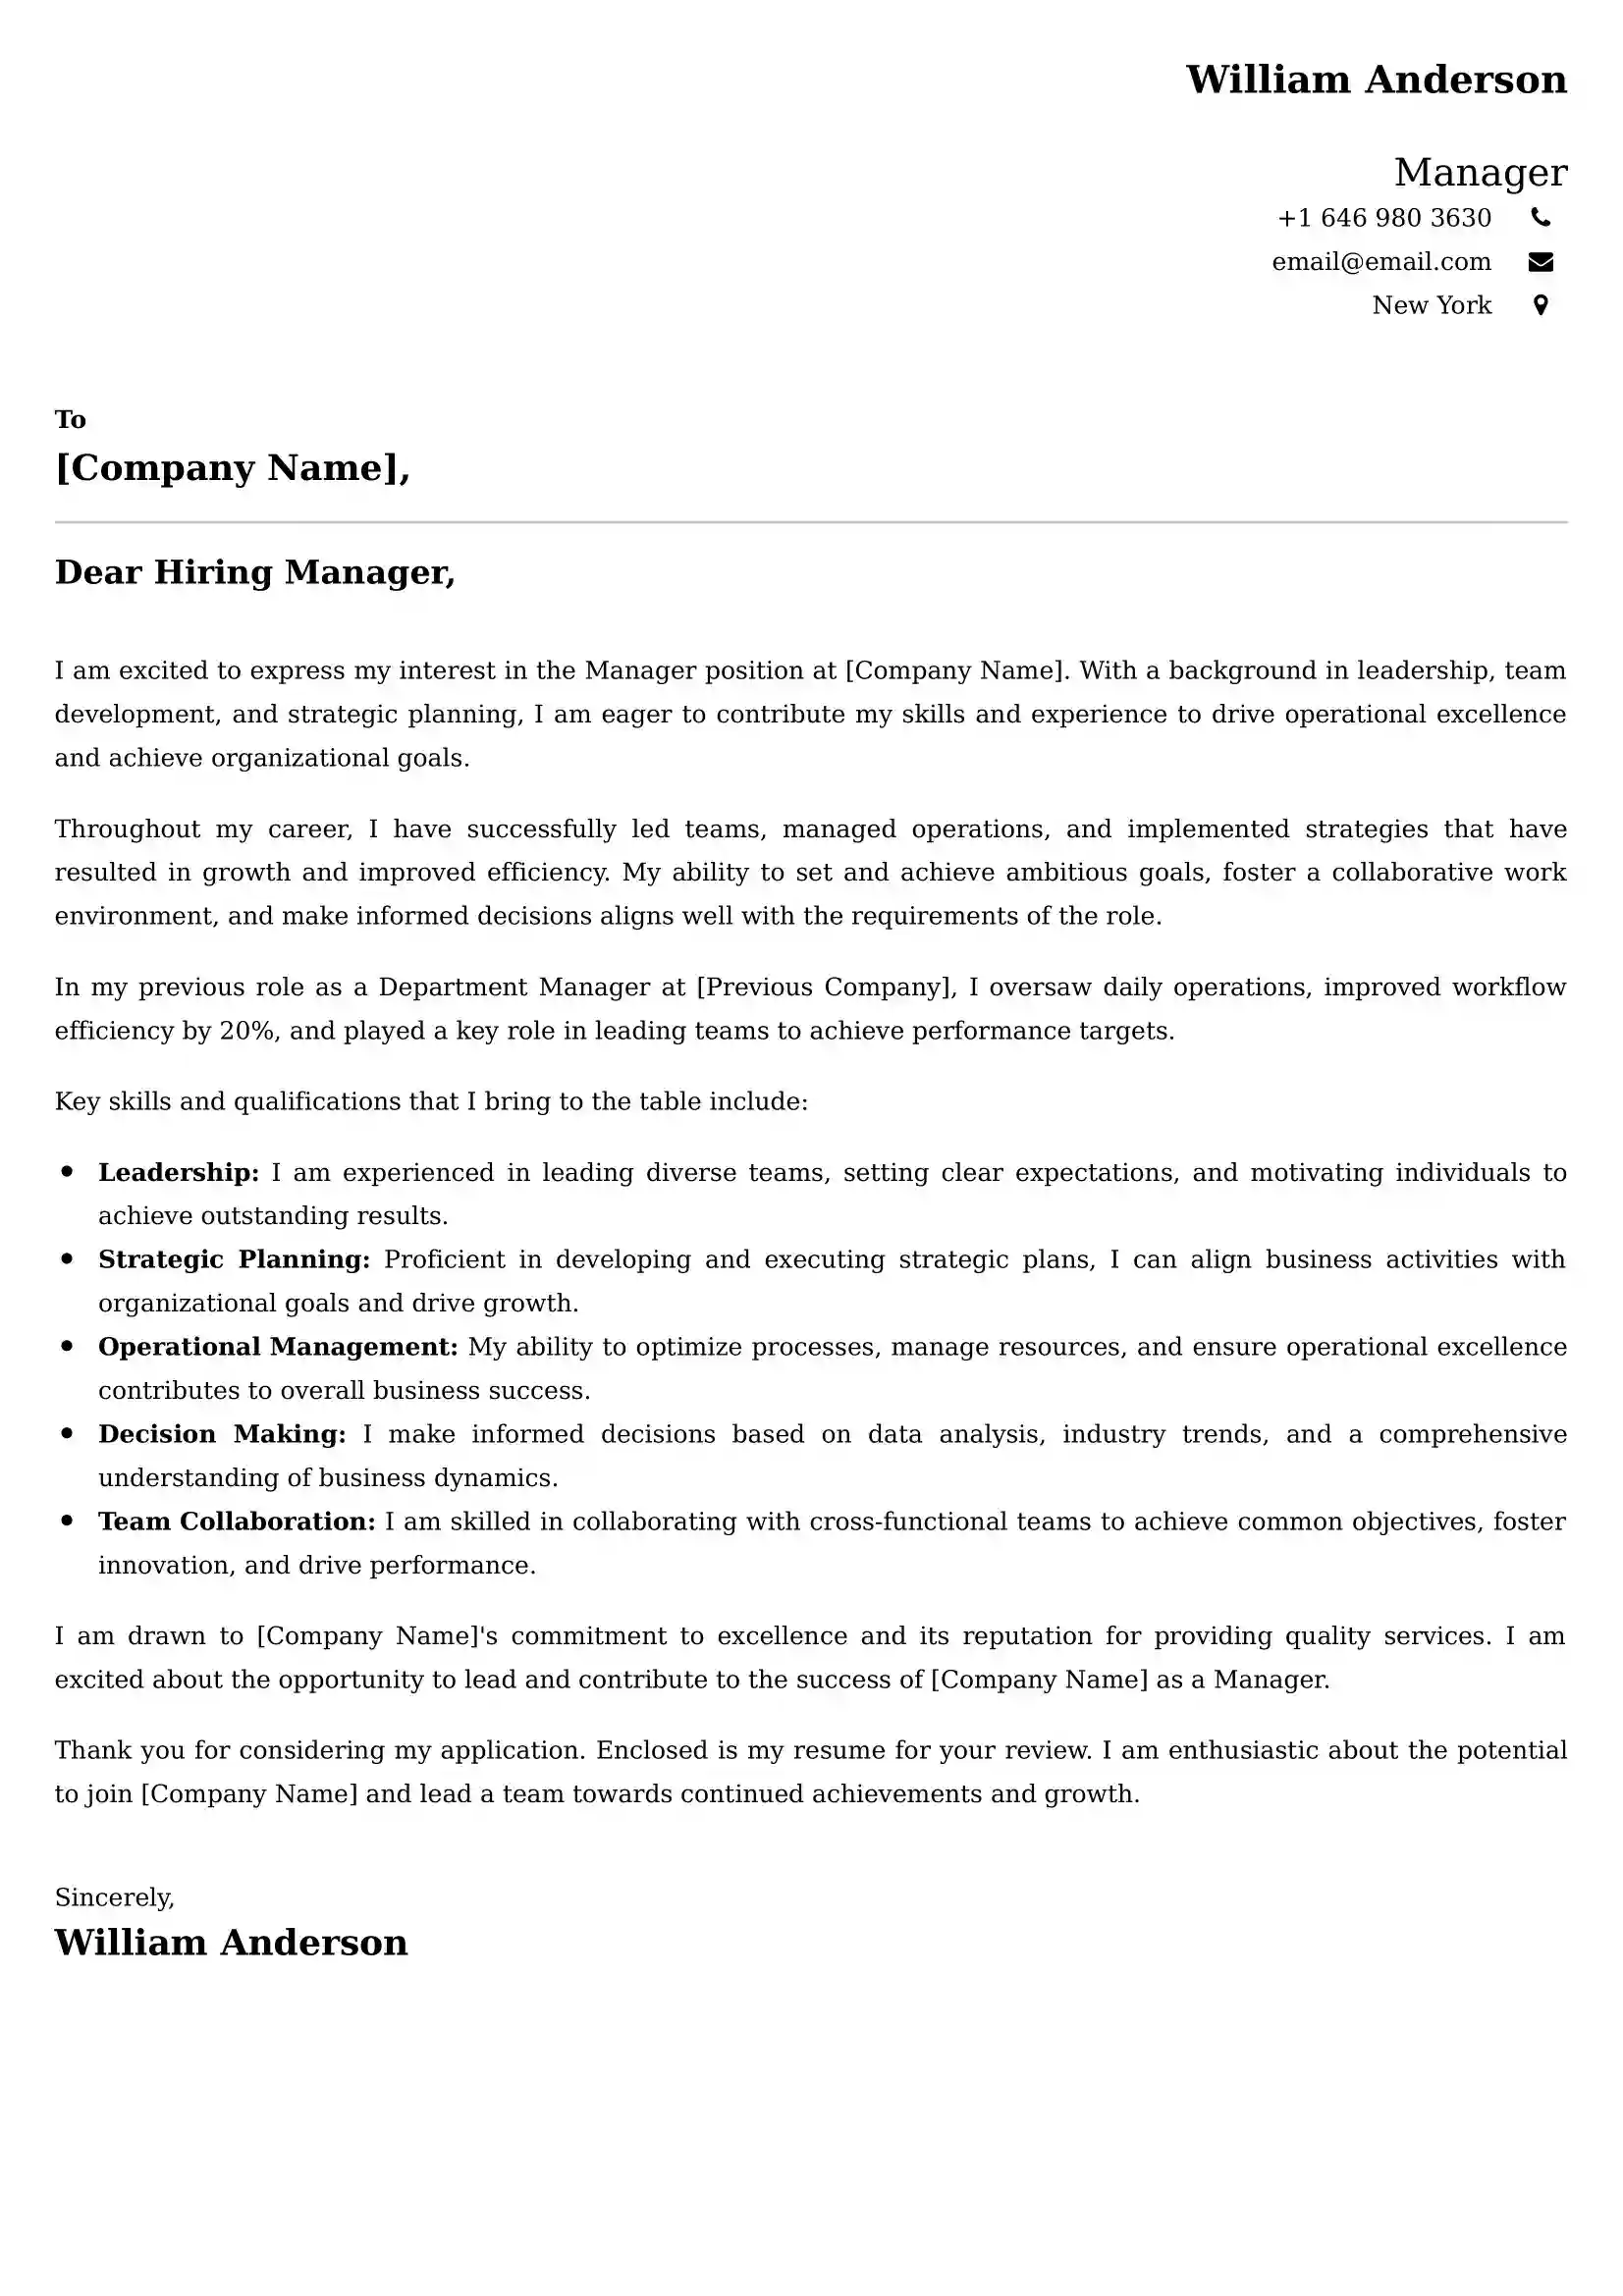 Manager Cover Letter Examples India